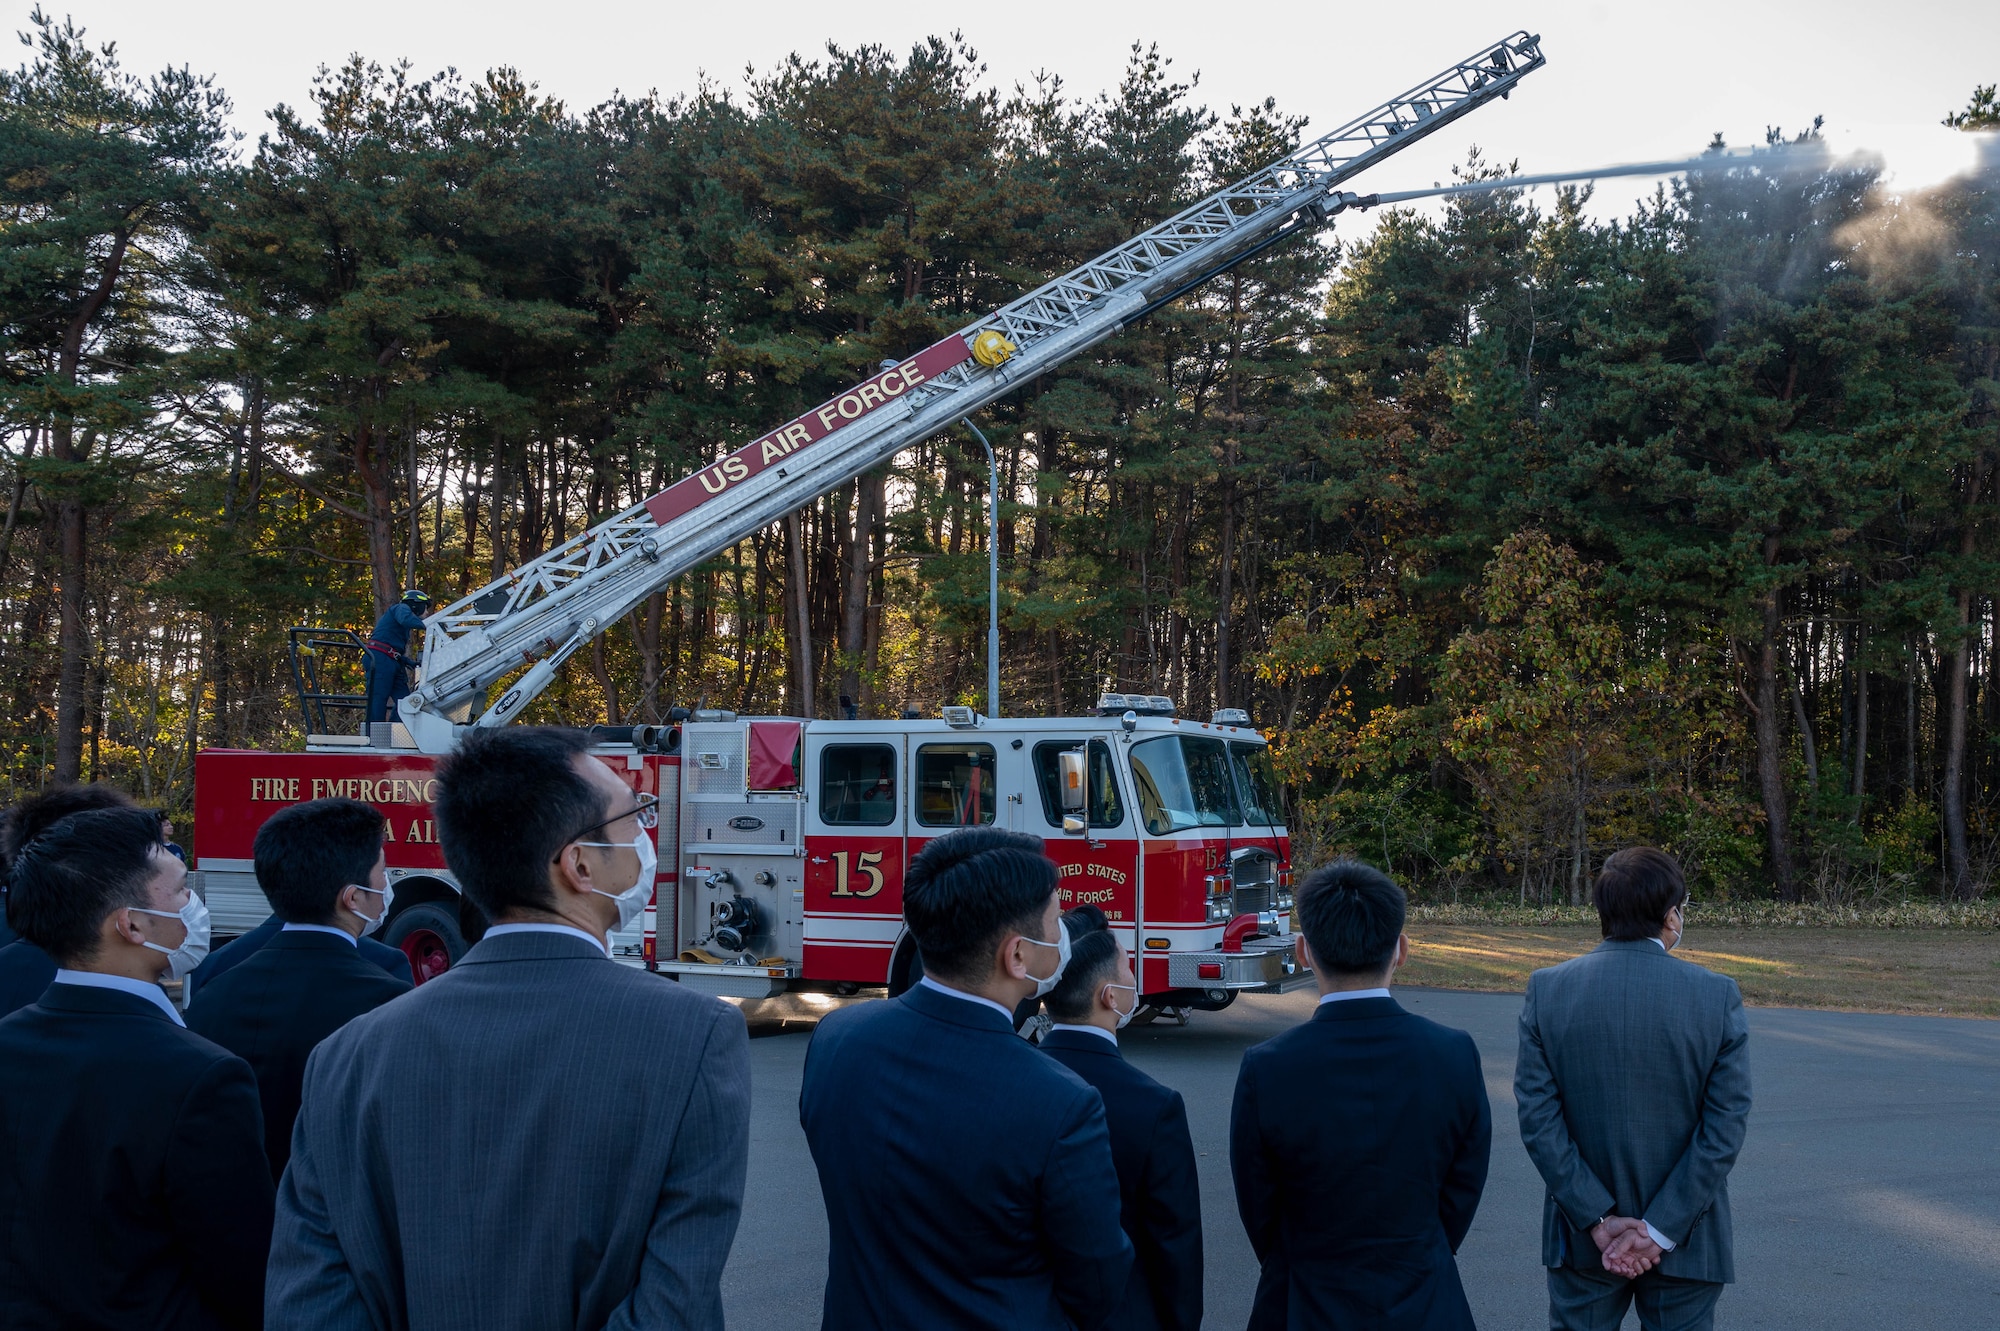 Aomori Prefecture Police cadets watch as a fire engine displays its ability to spray water remotely at Misawa Air Base, Japan.